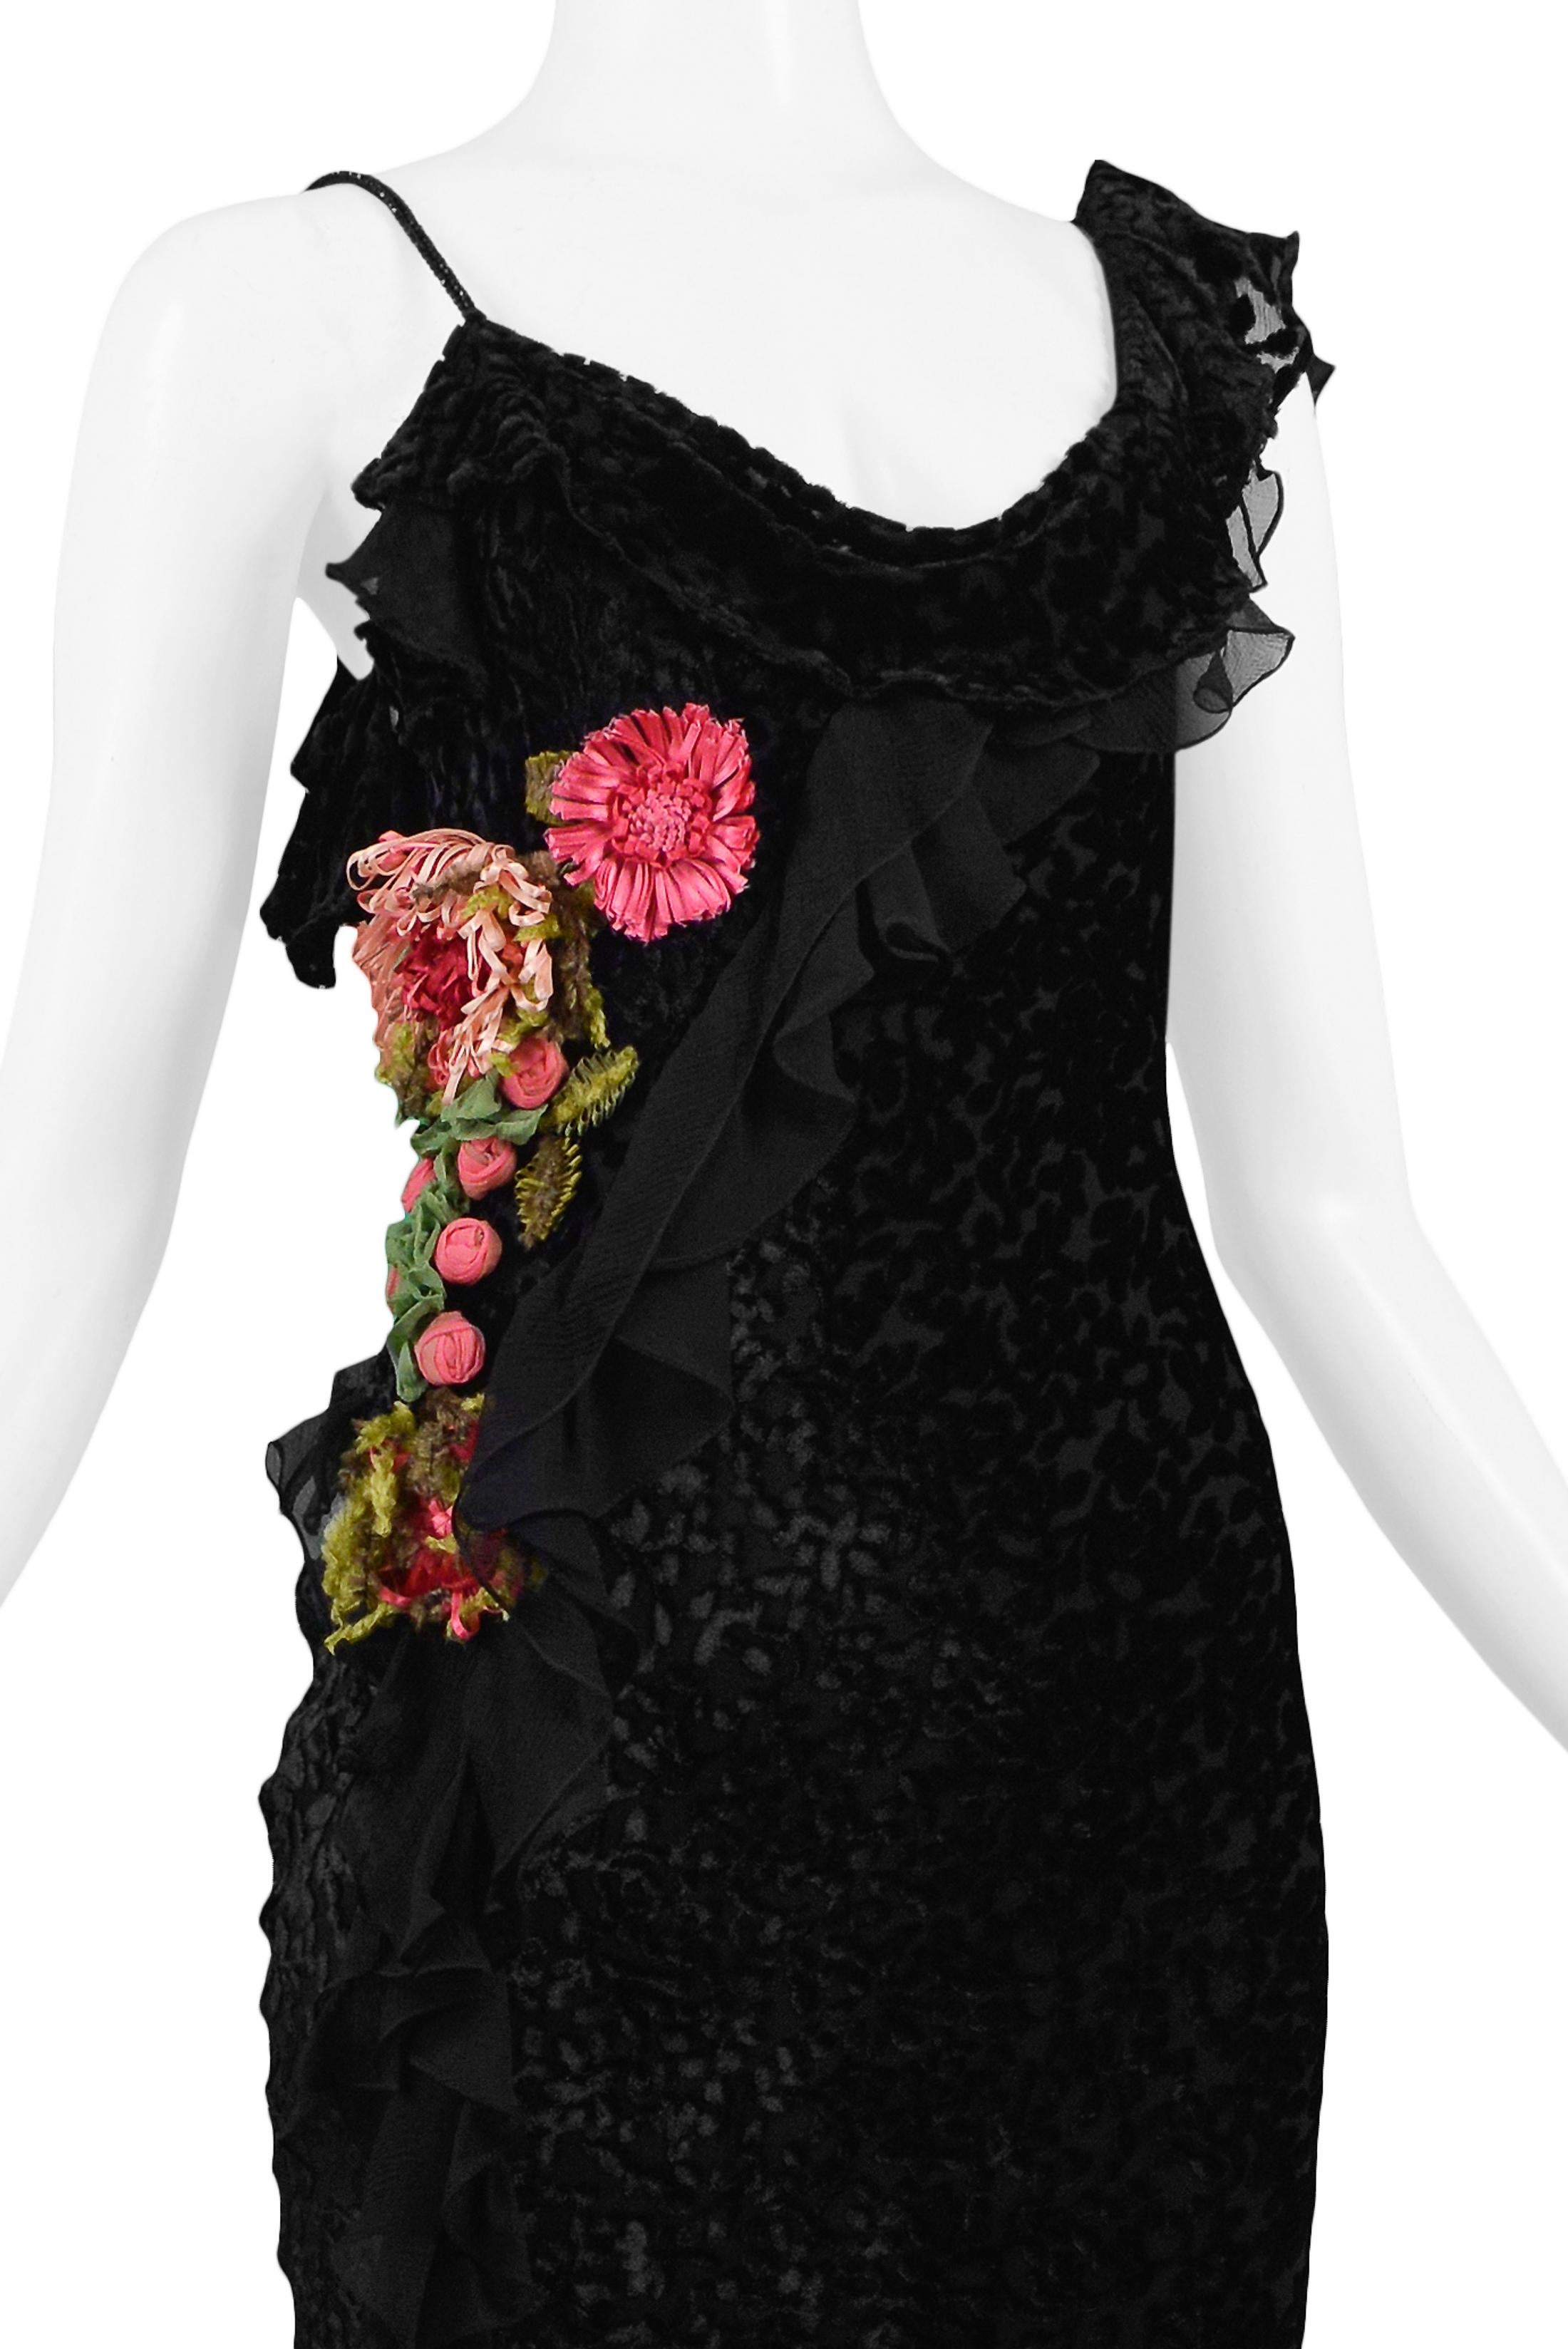 Dior by Galliano Black Velvet Devore Gown with Flowers 2002 In Excellent Condition In Los Angeles, CA